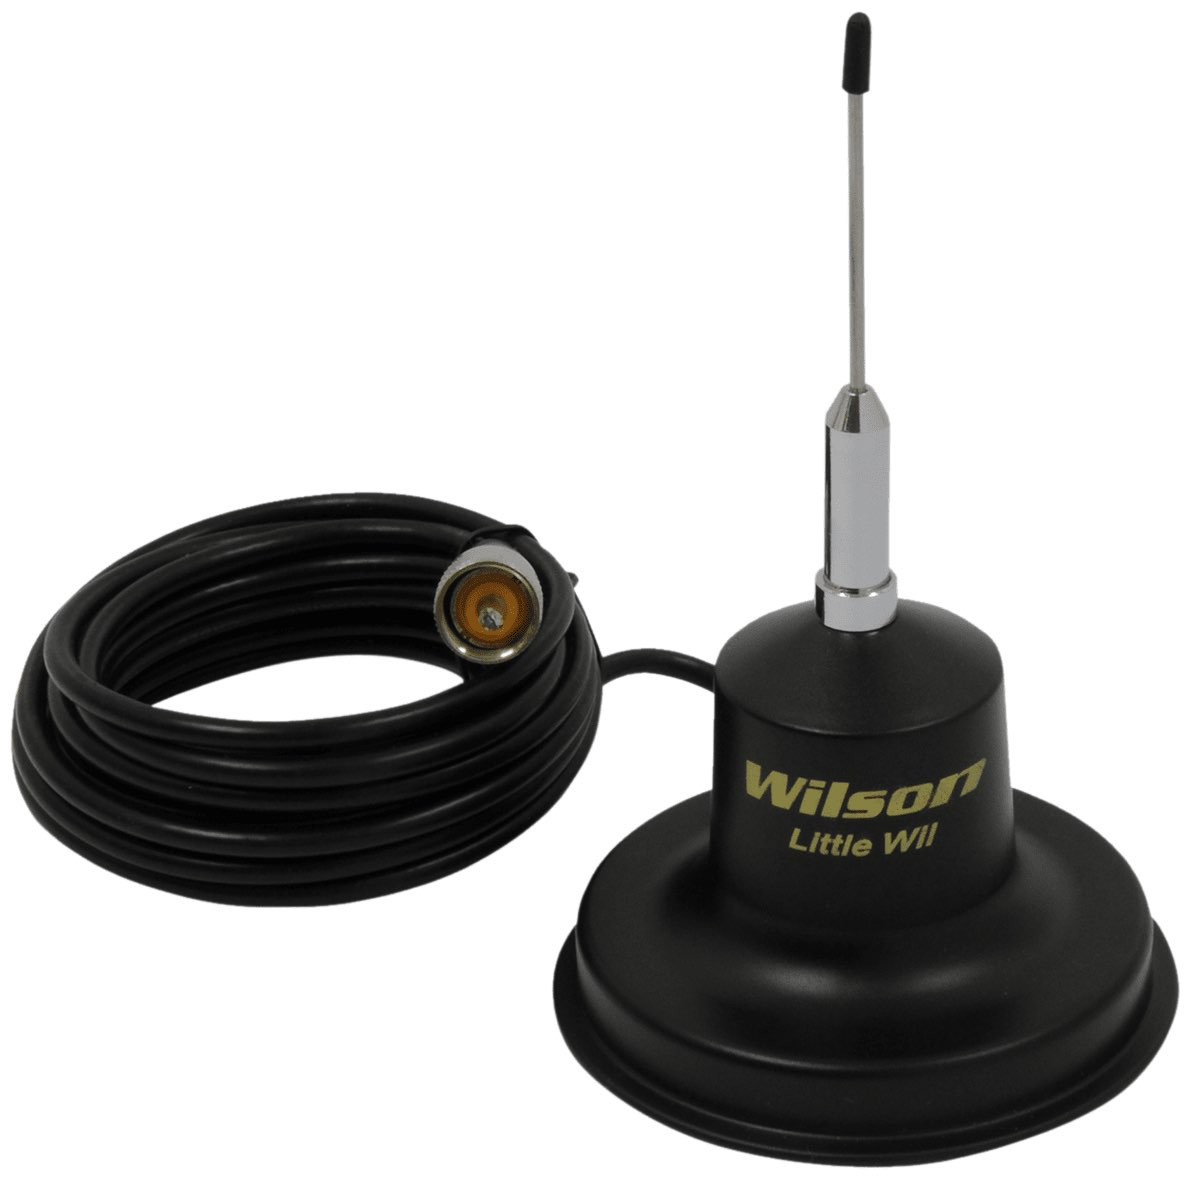 Picture of Astatic Wilson LITTLEWILLCARDED 36 in. Magnet Mount CB Display Antenna Kit